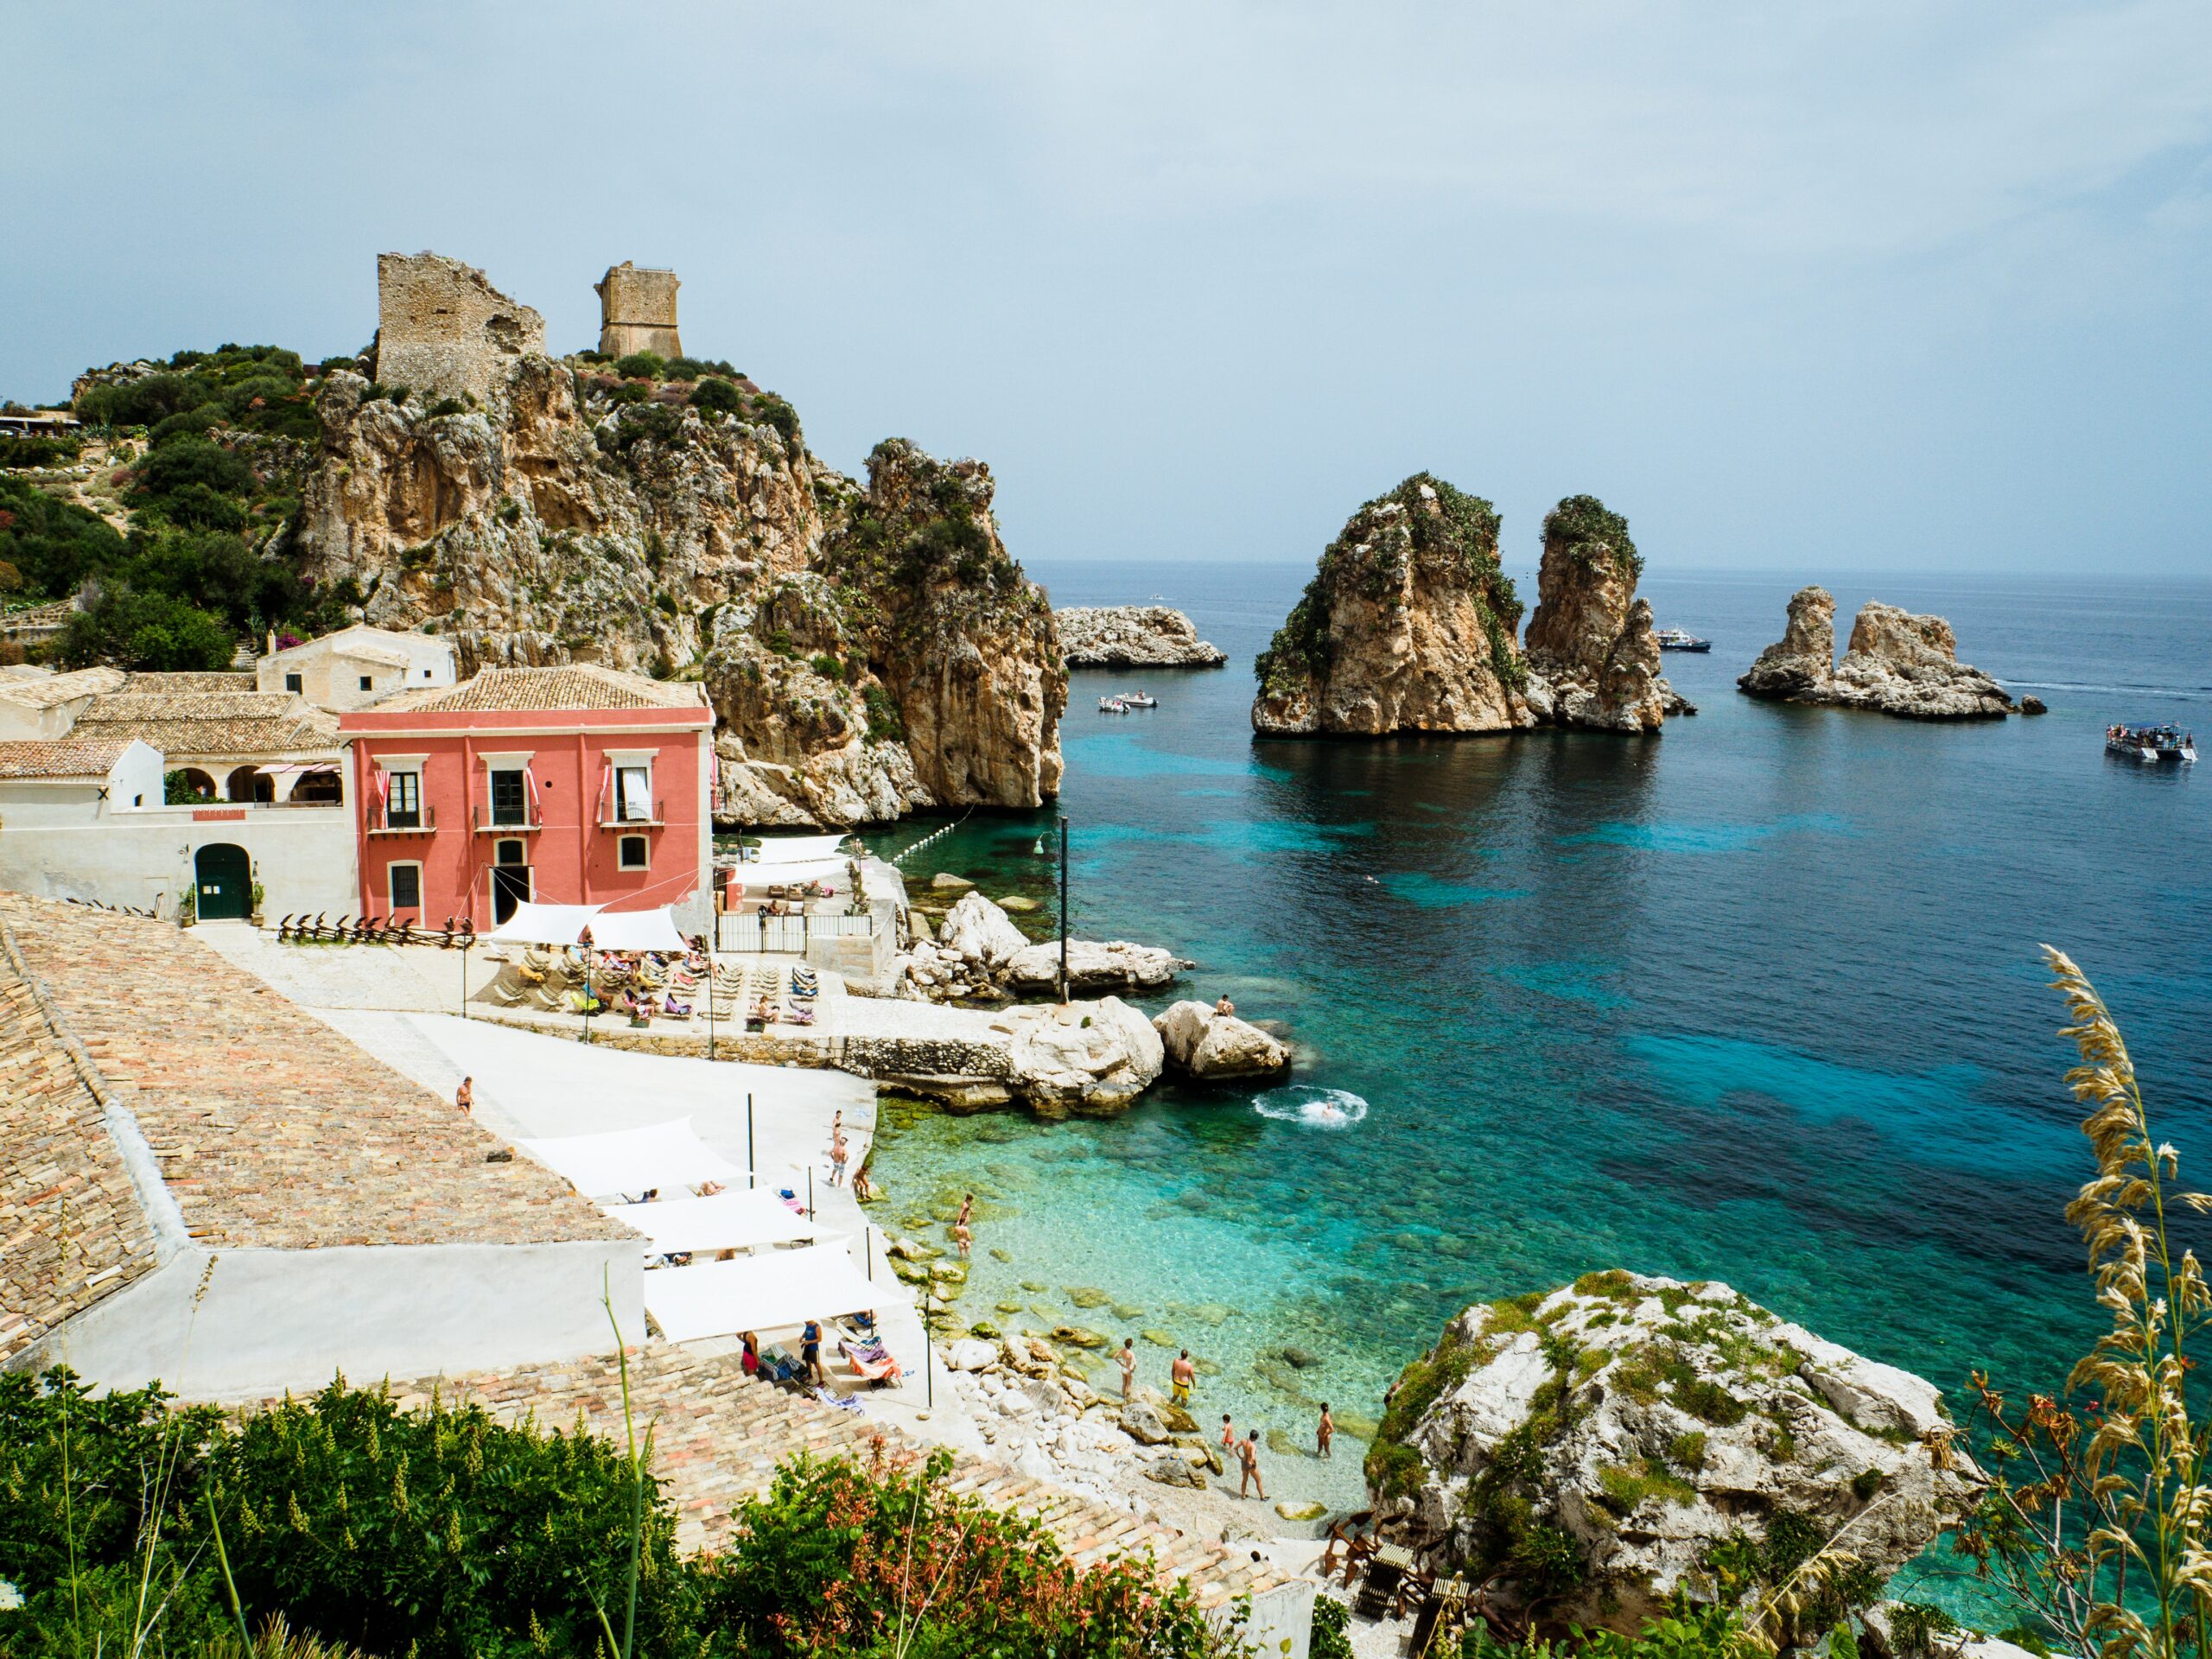 Sicily is one of the countryside regions of Italy that offers a unforgettable stay.
pictured: The Sicilian coast and a small village that borders the turquoise waters. 